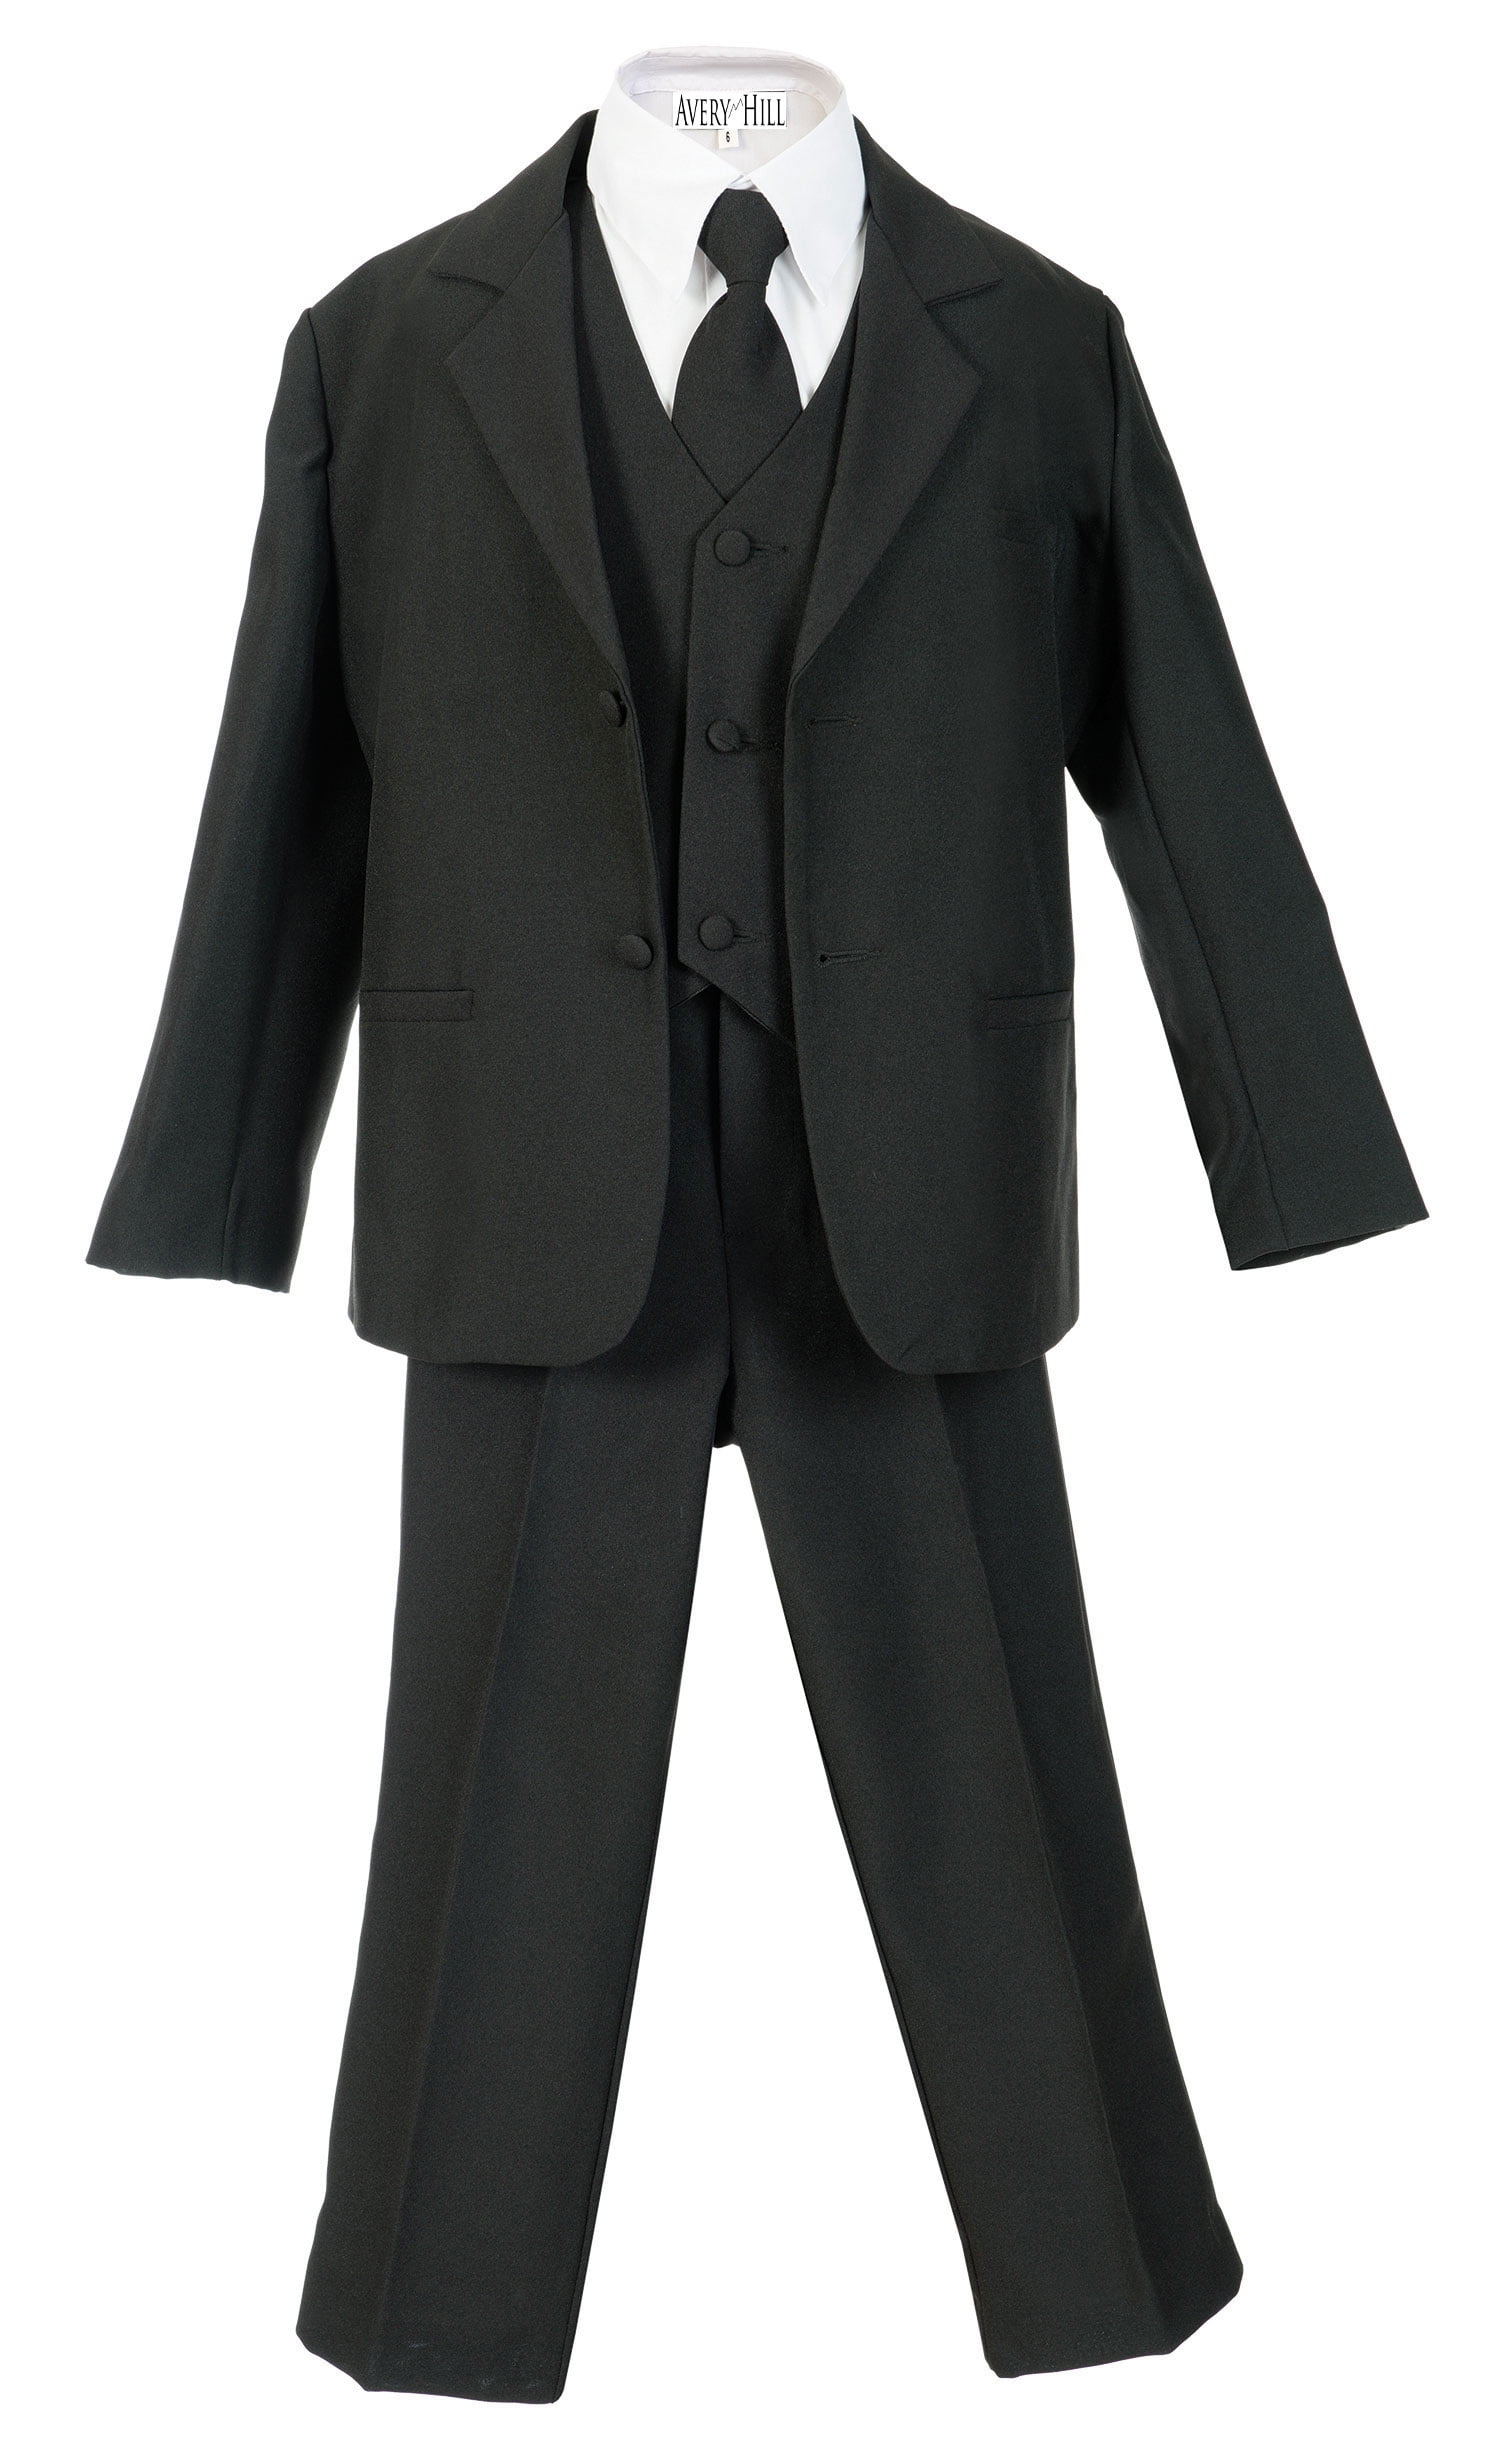 New Dark Gray Boys Vest Suit Outfit 4 Pc Wedding Holidays Baby Toddler Kids 